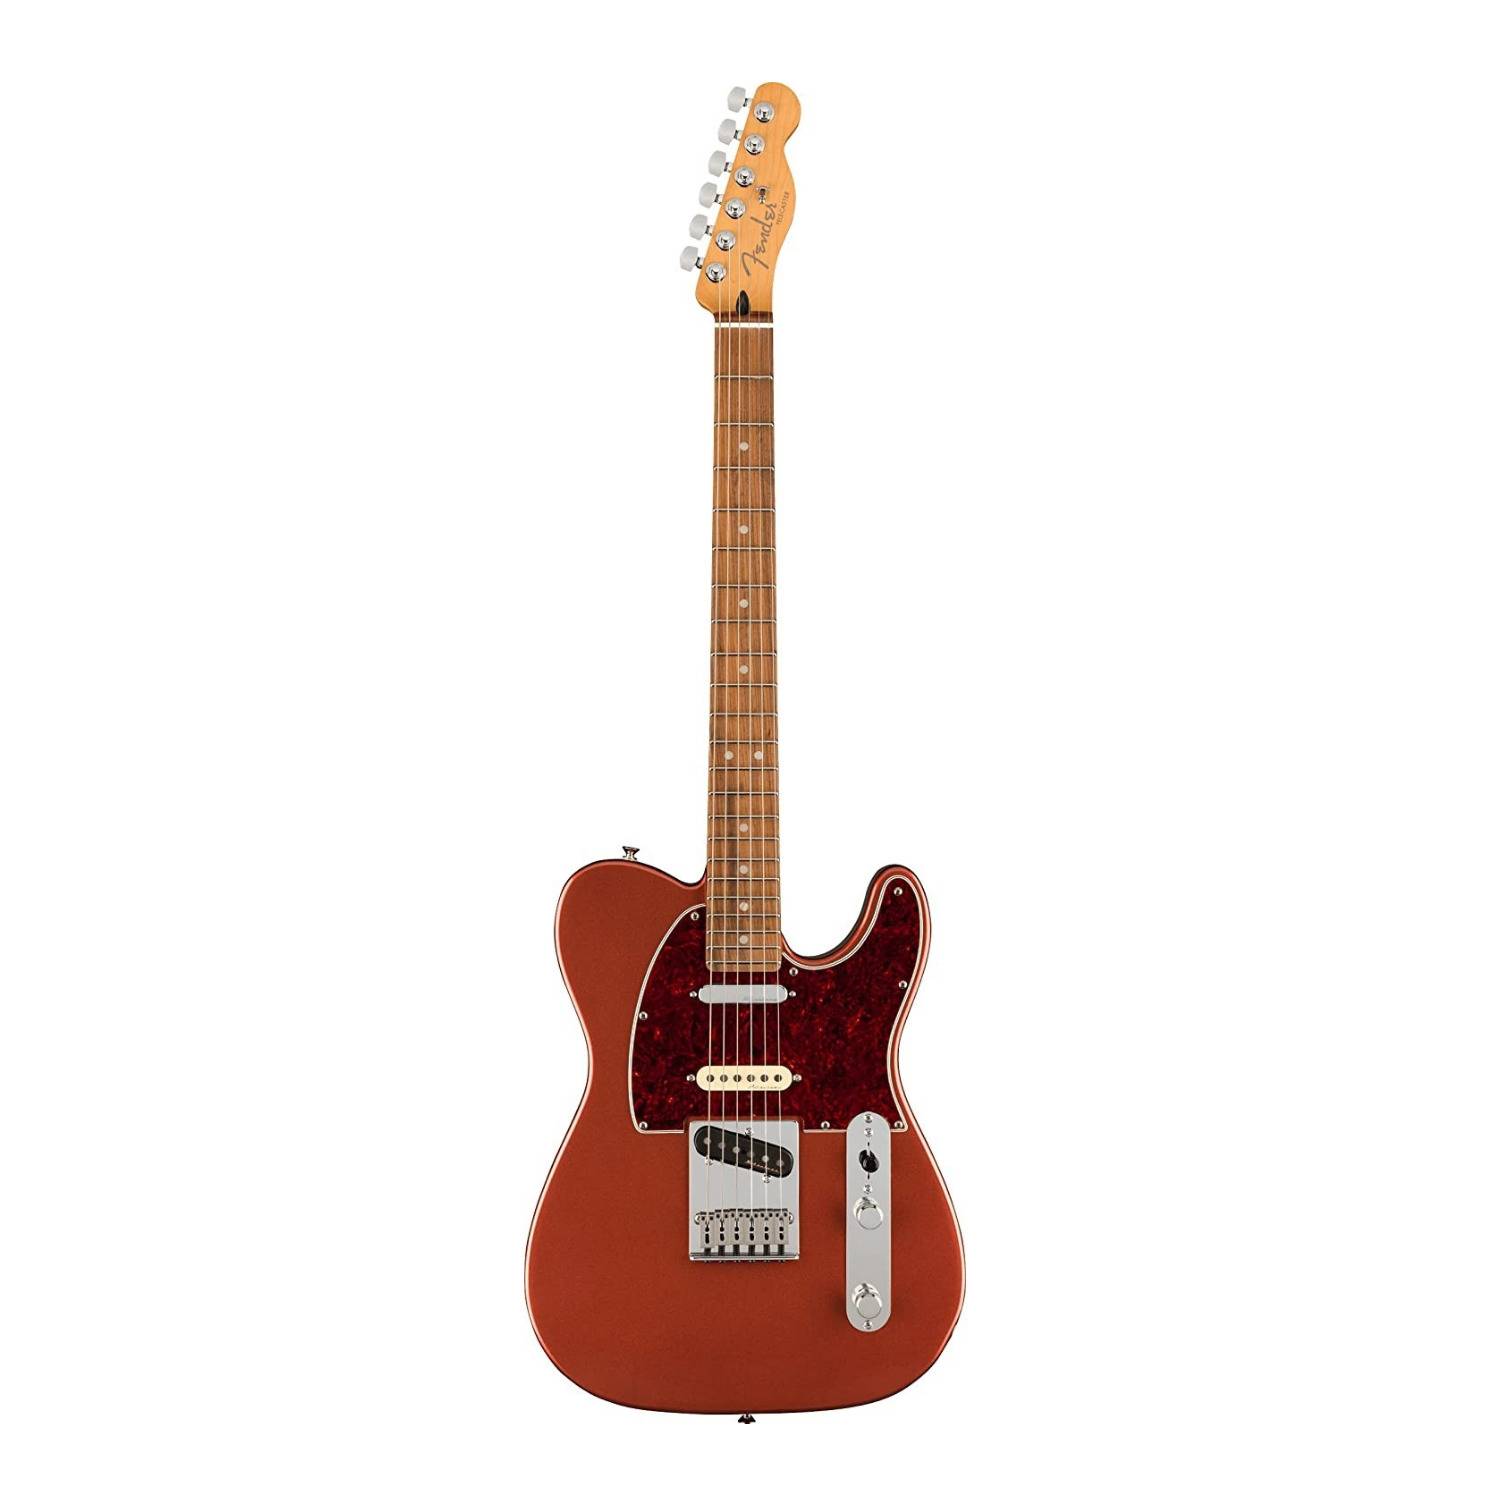 Fender Player Plus Nashville Telecaster 6-String Electric Guitar (Right-Hand, Aged Candy Apple Red)